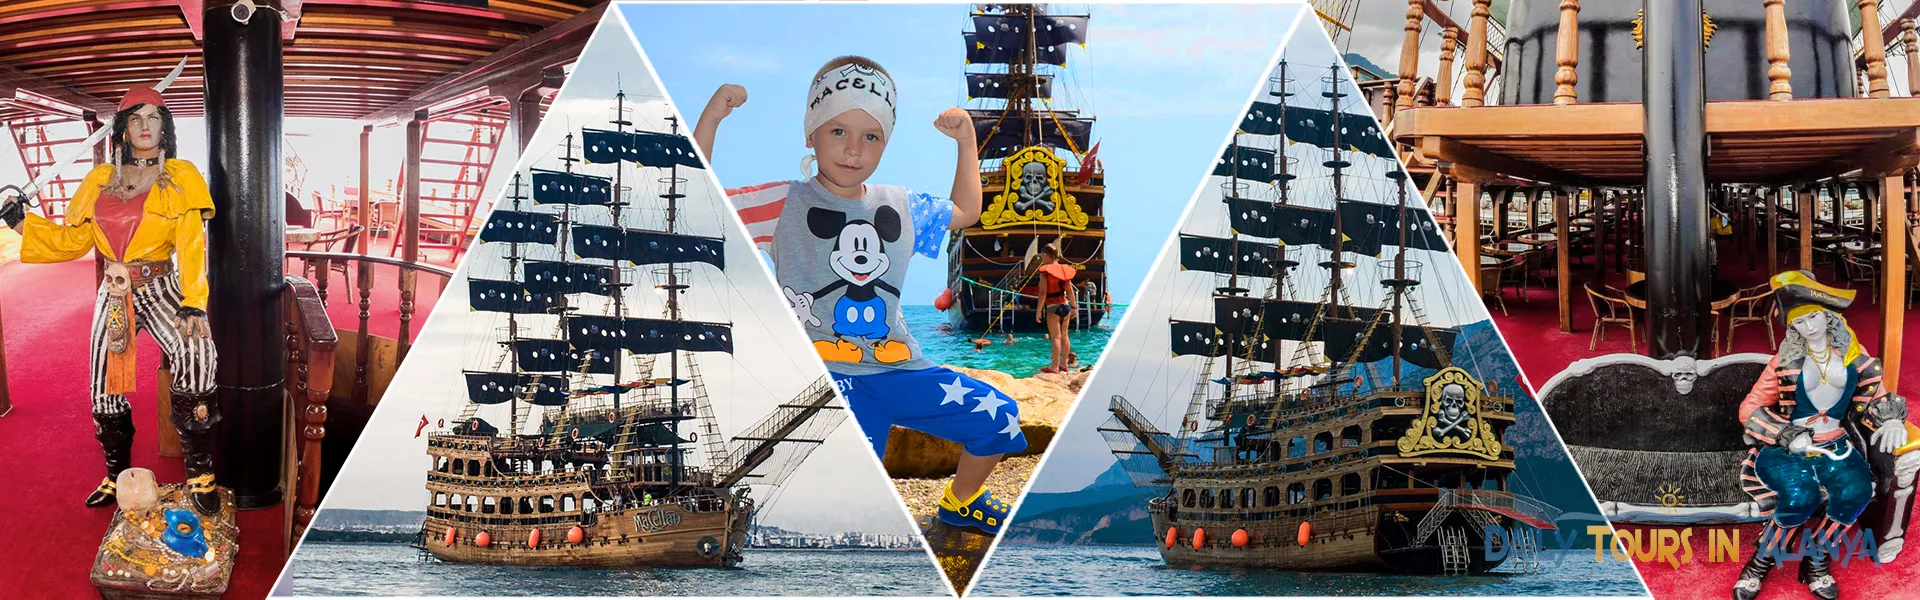 Alanya Grand Troys Pirate Boat Tour